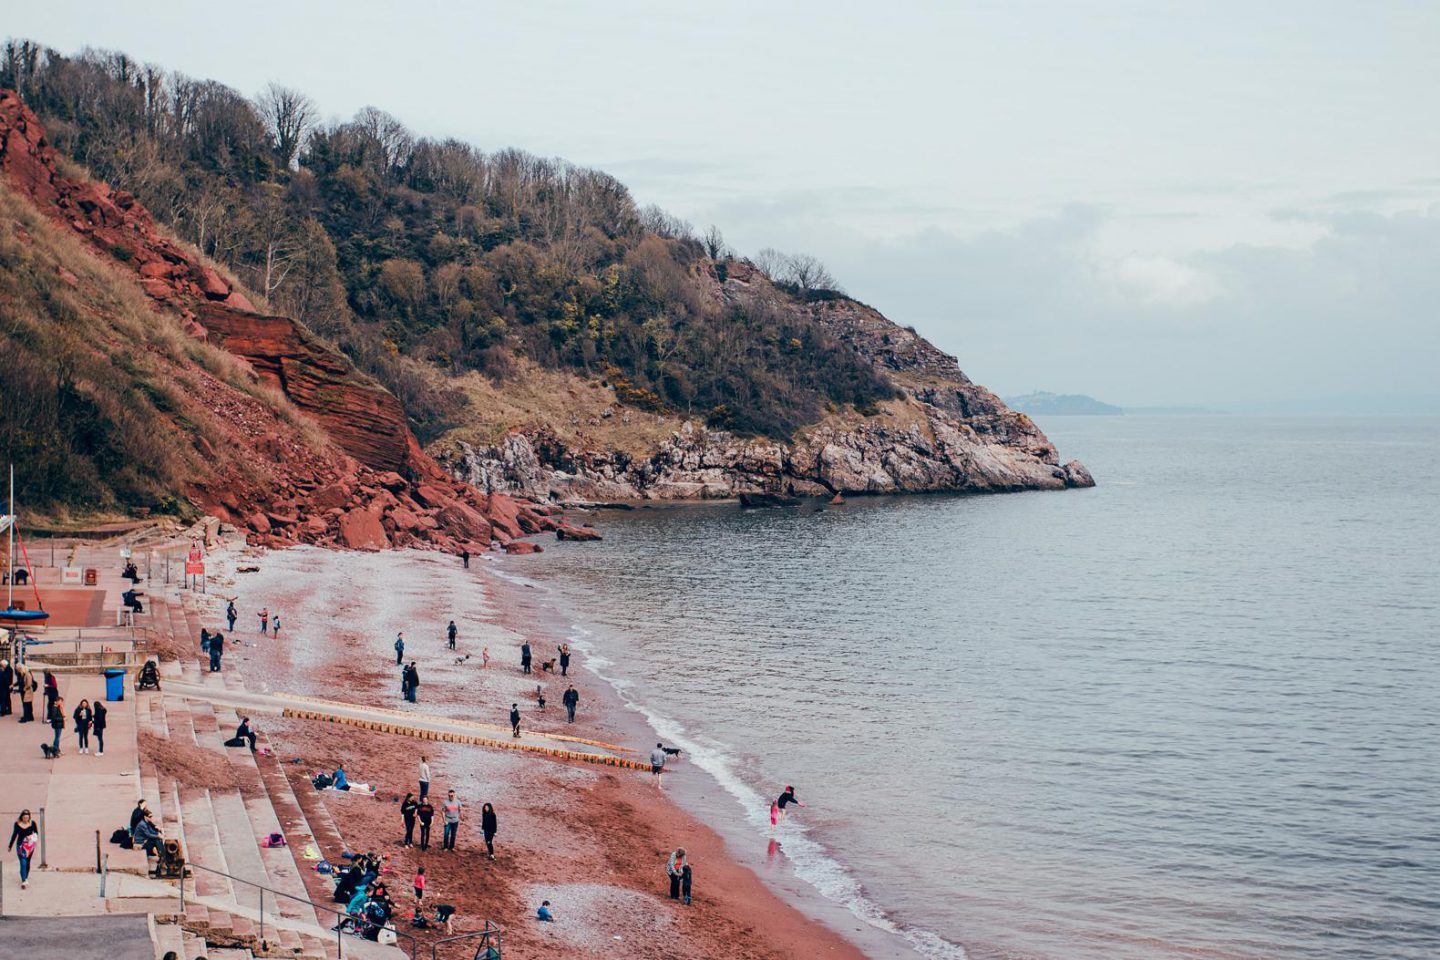 Ten things to do in South Devon, the British Riviera